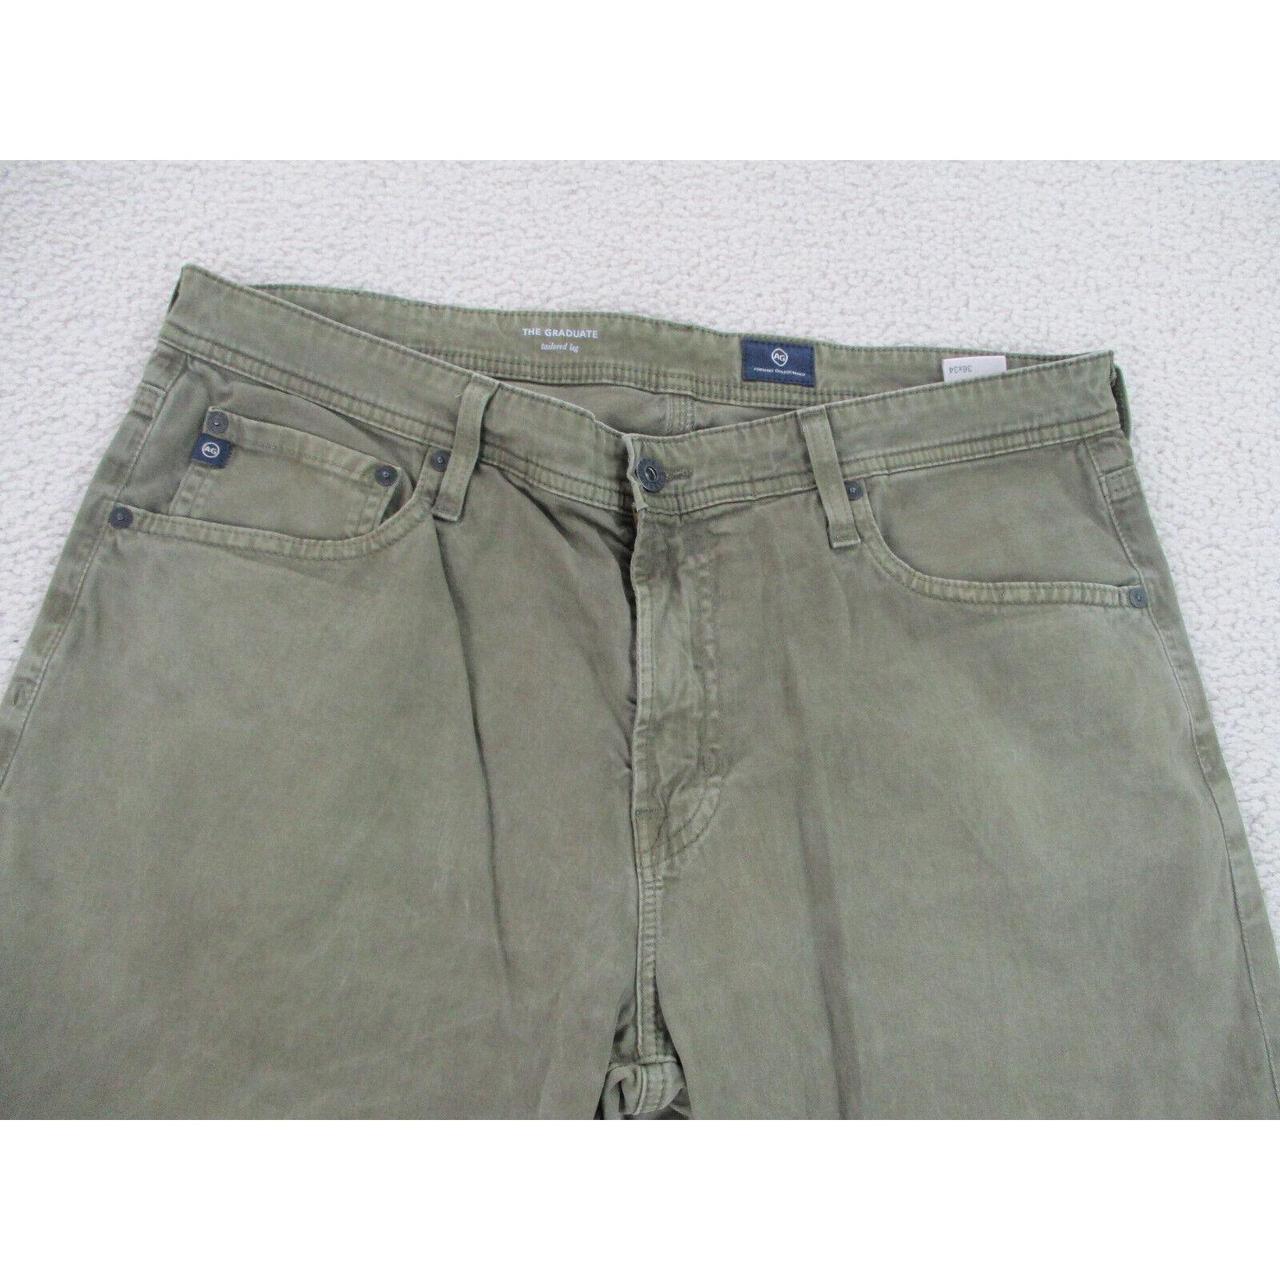 Product Image 3 - Adriano Goldschmied Pants Mens 36